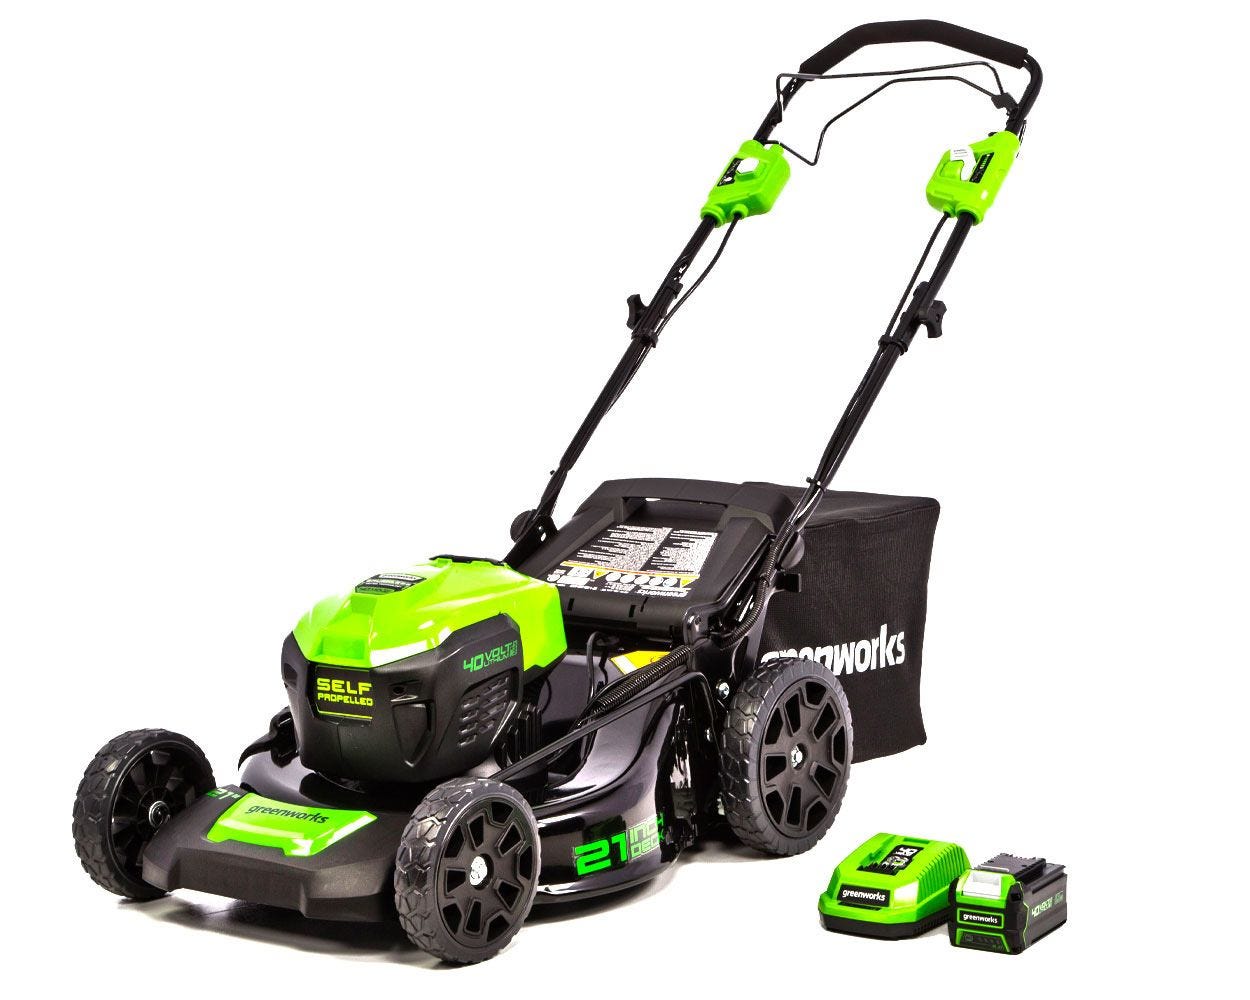 Greenworks 21" 40V Self-Propelled Lawn Mower with 5.0 Ah Battery & Charger​ 2516402 - image 1 of 16